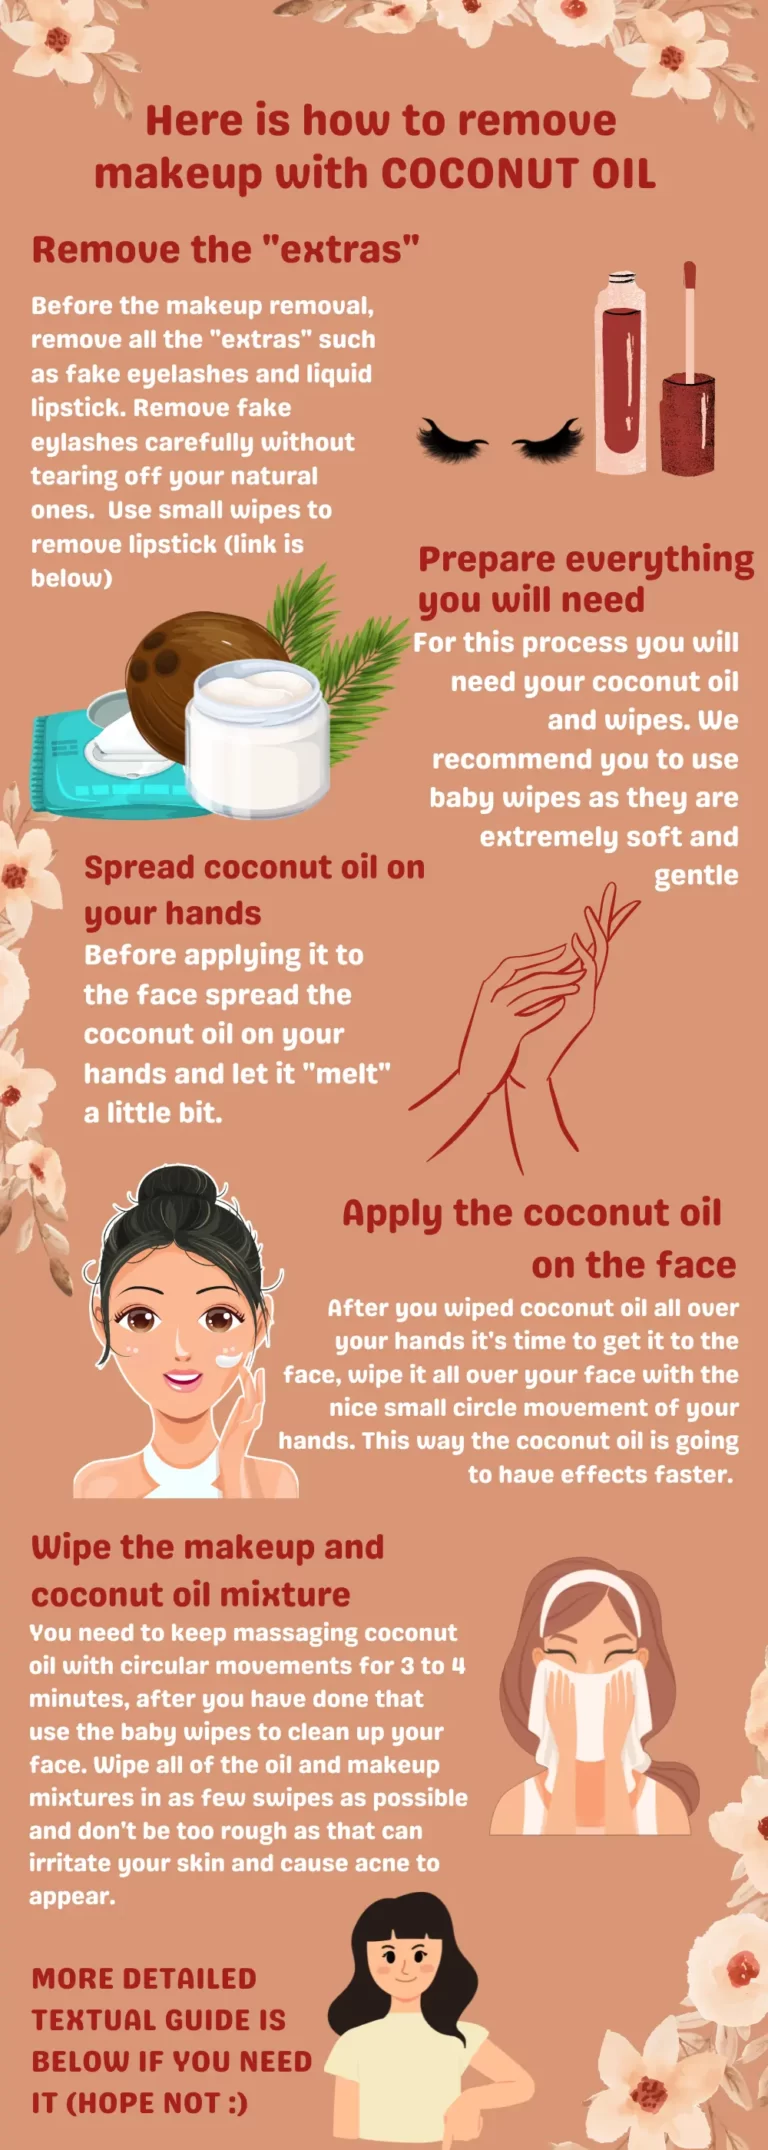 Here is how to remove makeup with COCONUT OIL